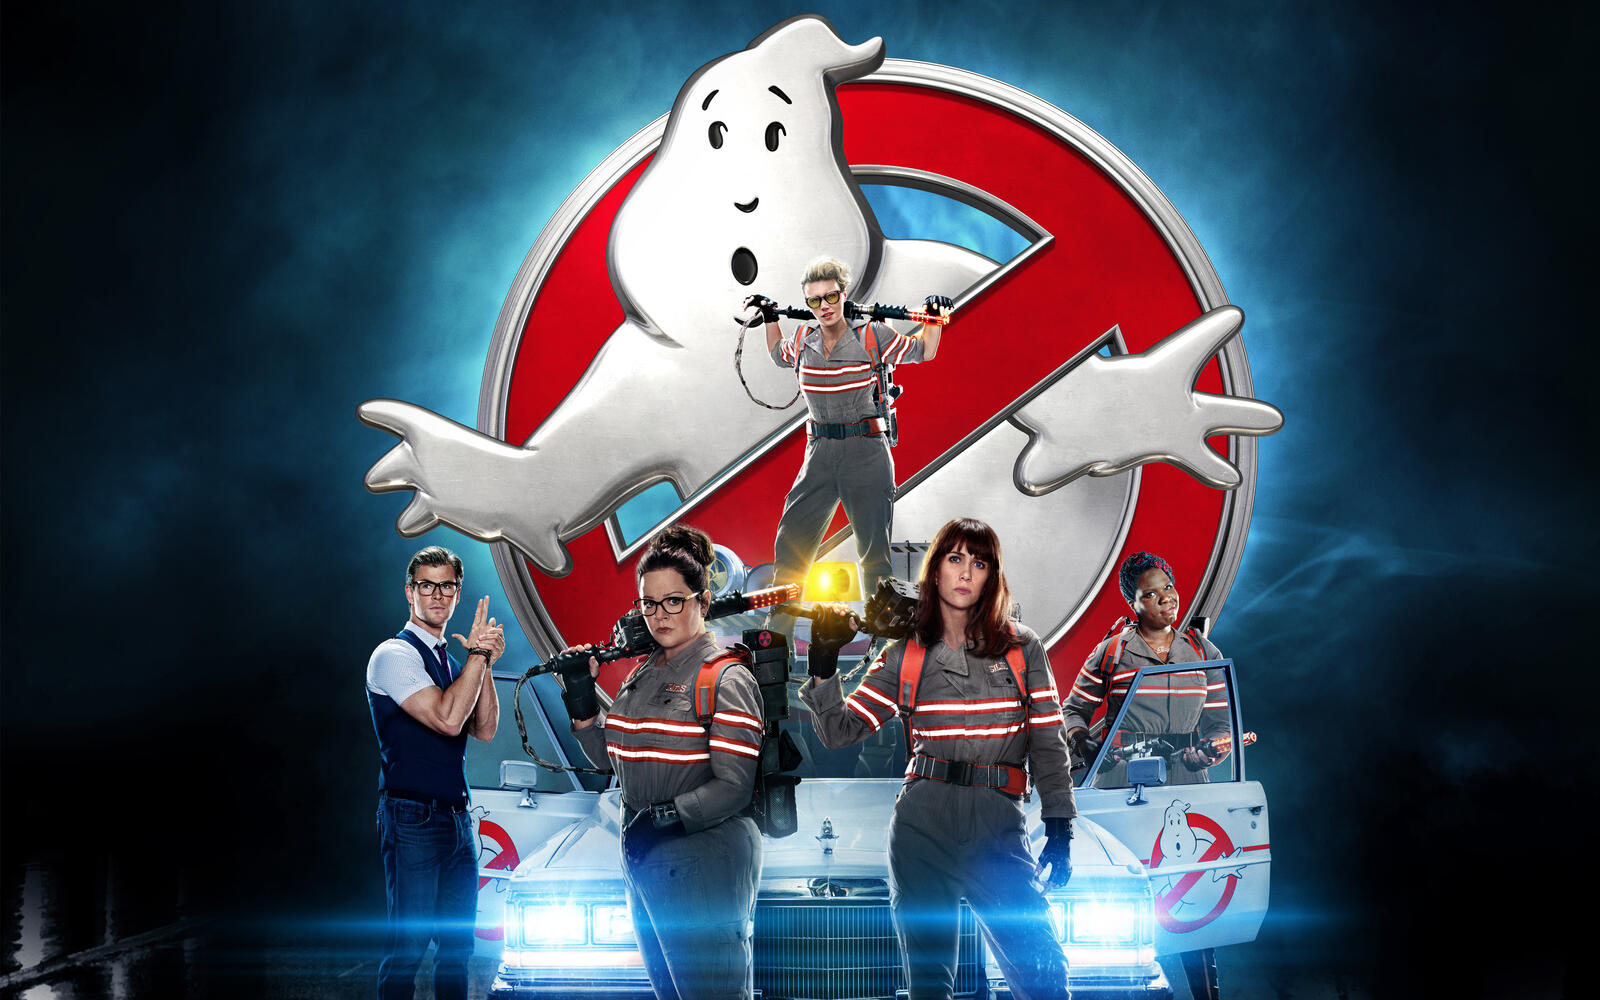 Wallpapers ghostbusters 3 movies 2016 movies on the desktop